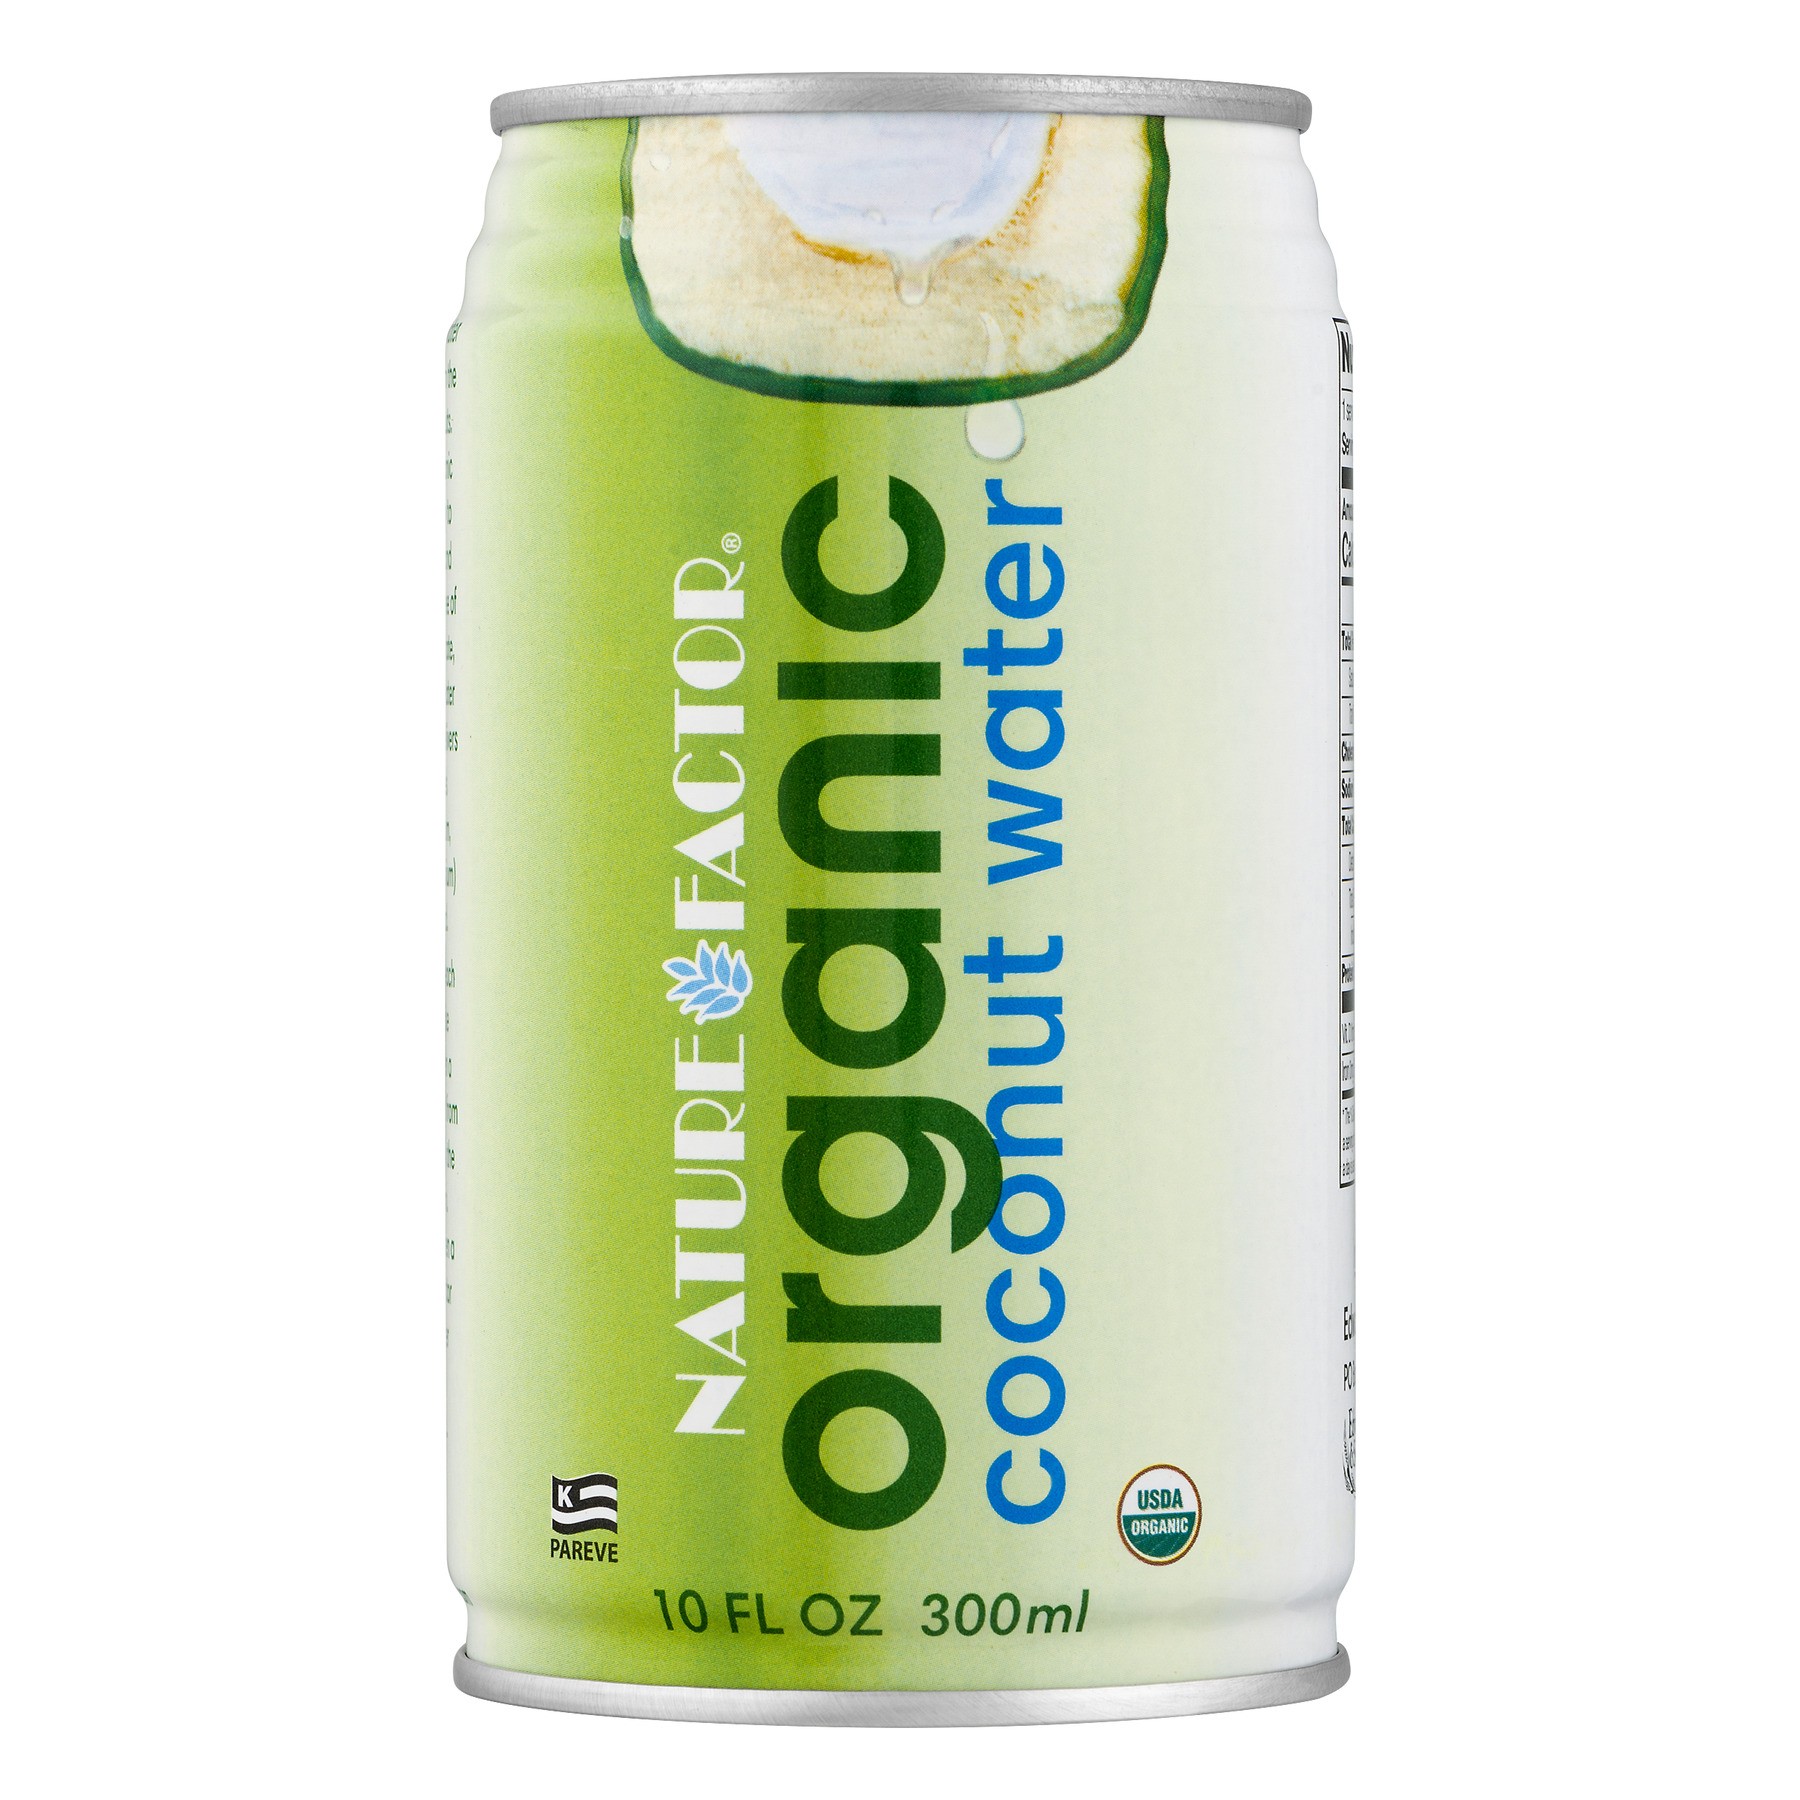 Nature Factor Young Coconut Water (12x10.1 Oz)